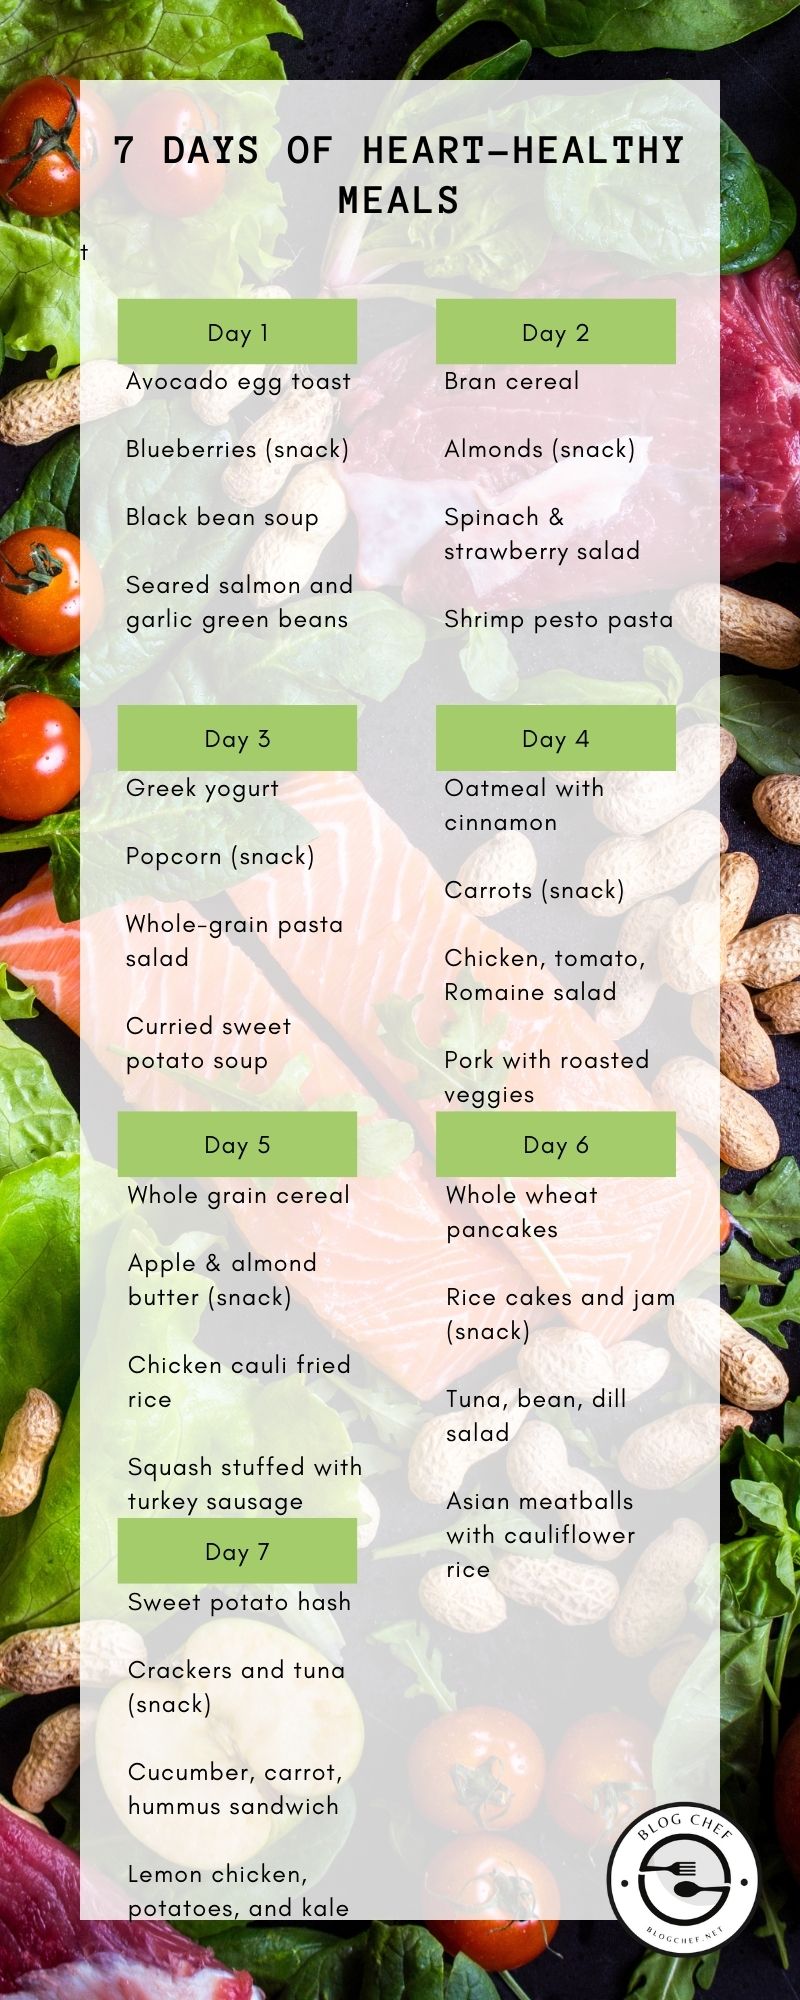 7 days of heart-healthy meals.